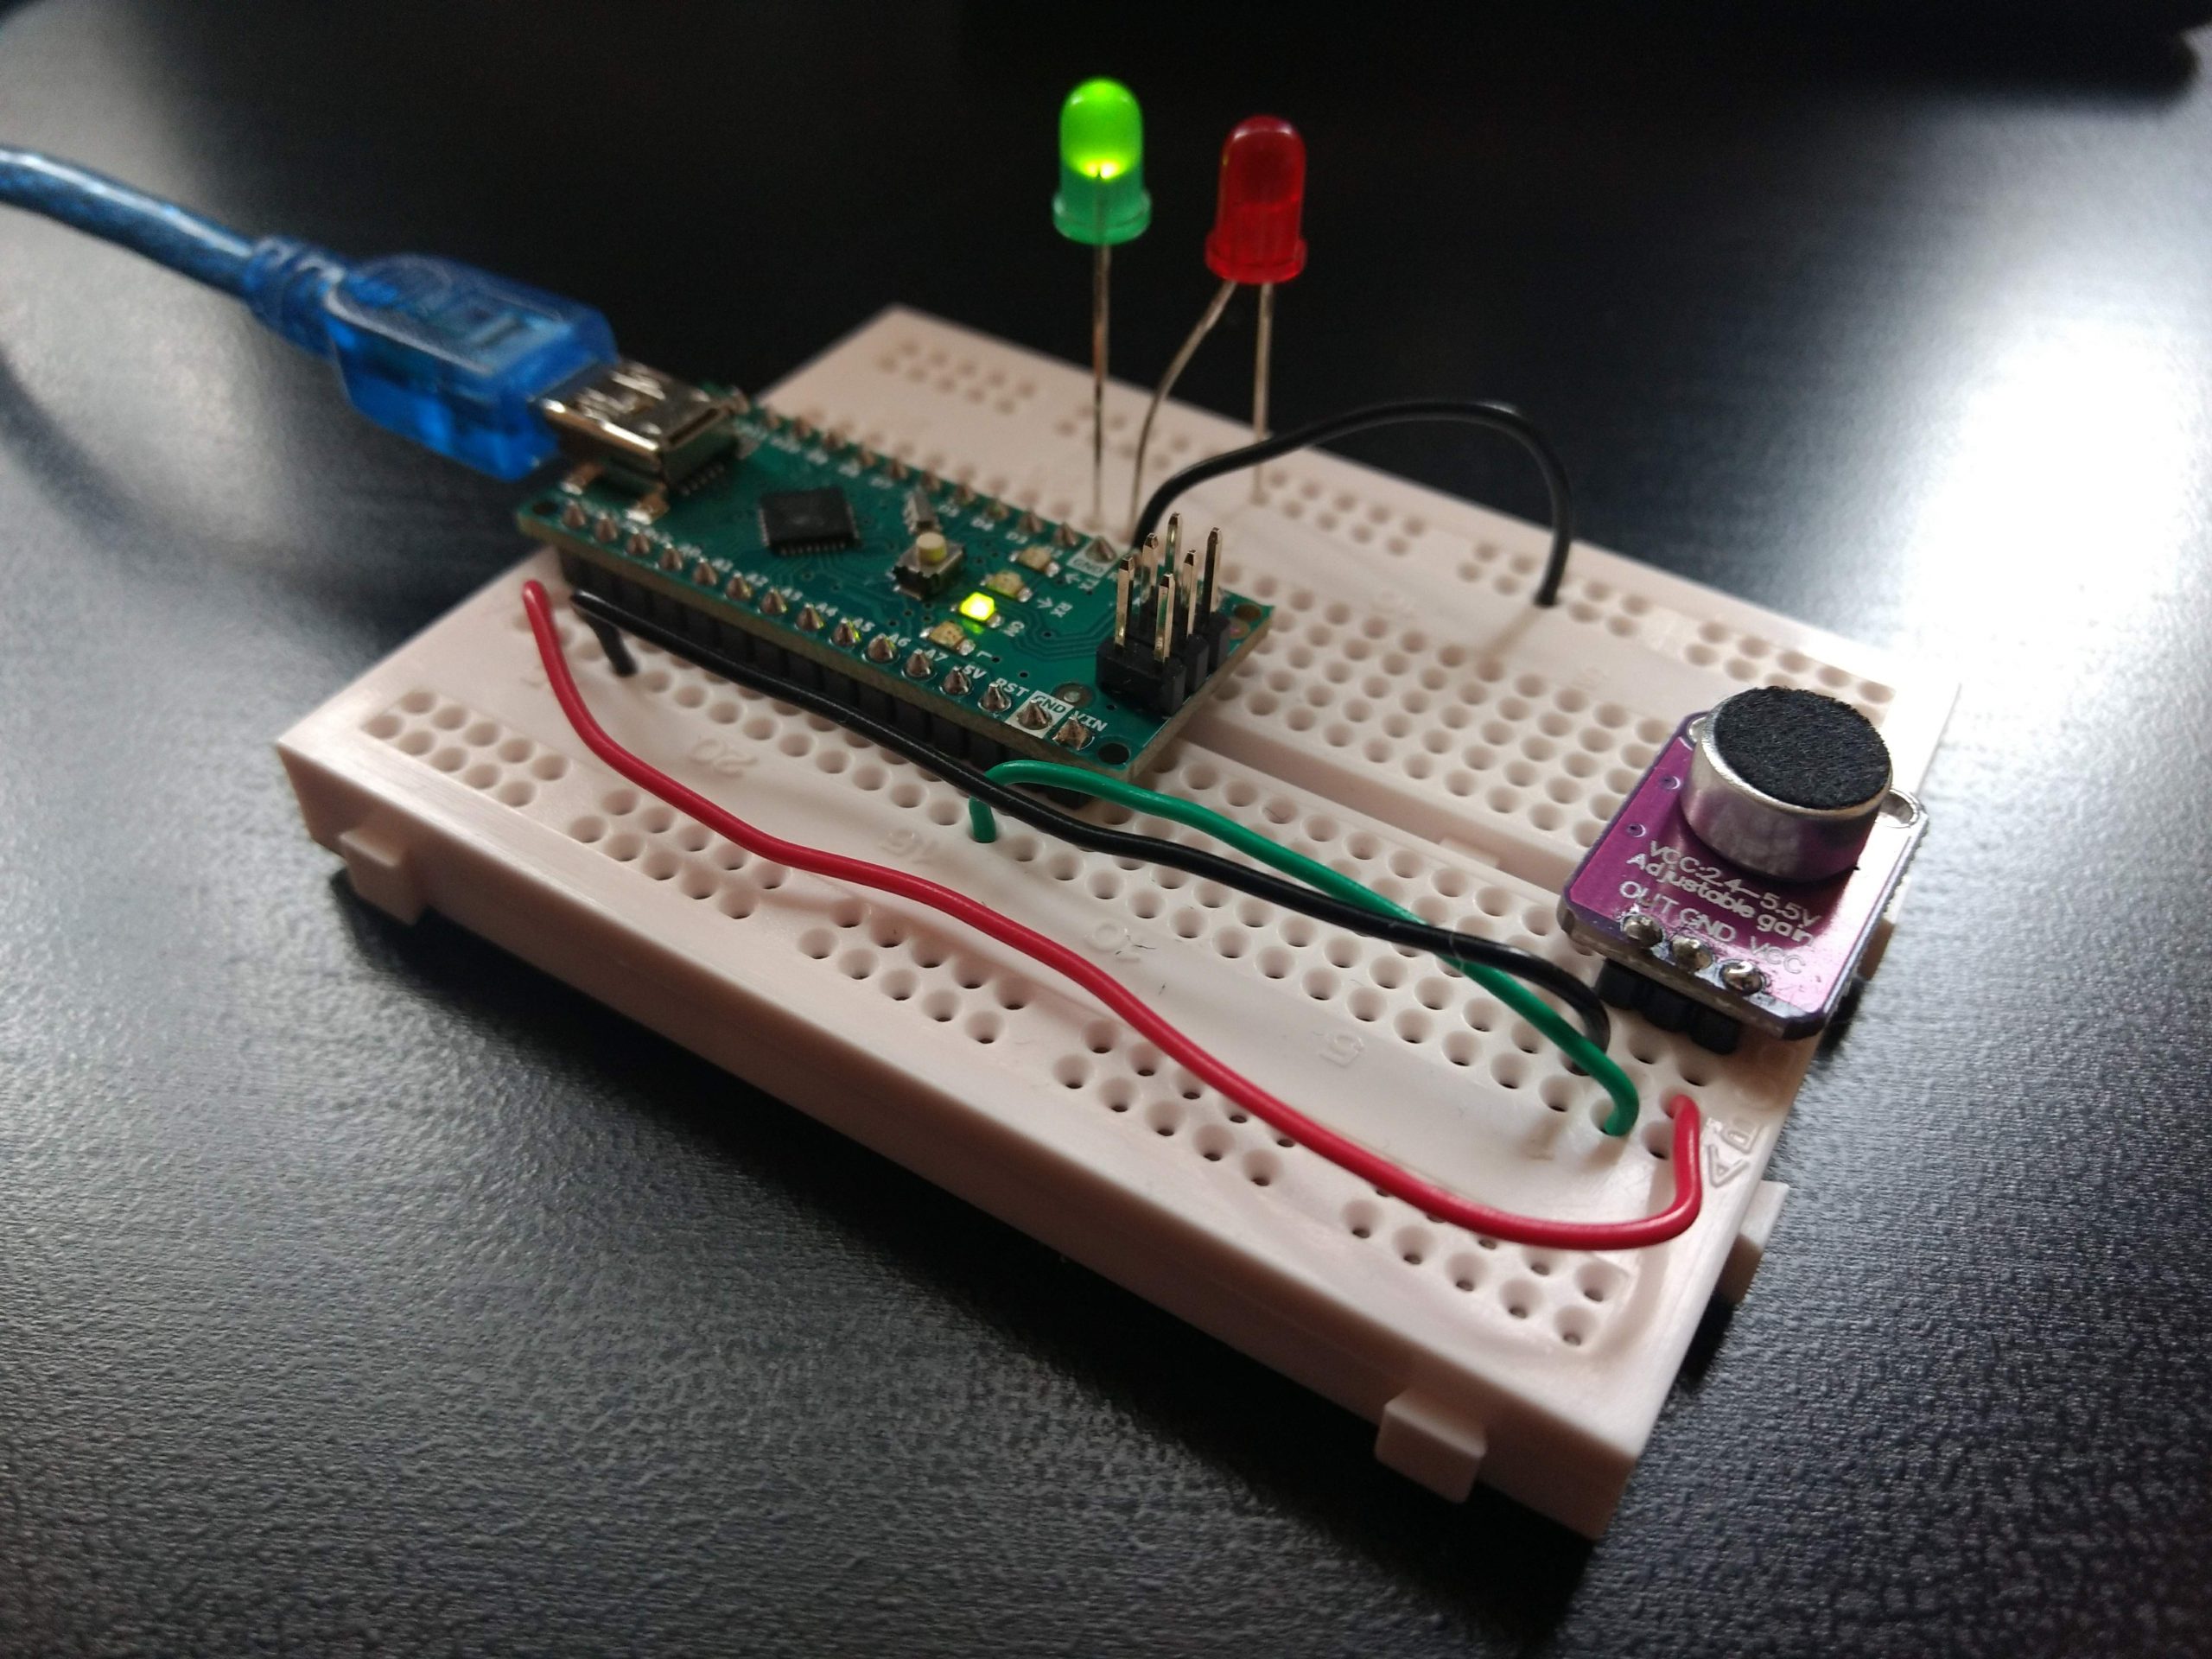 Simple Arduino circuit of voice loudness detector